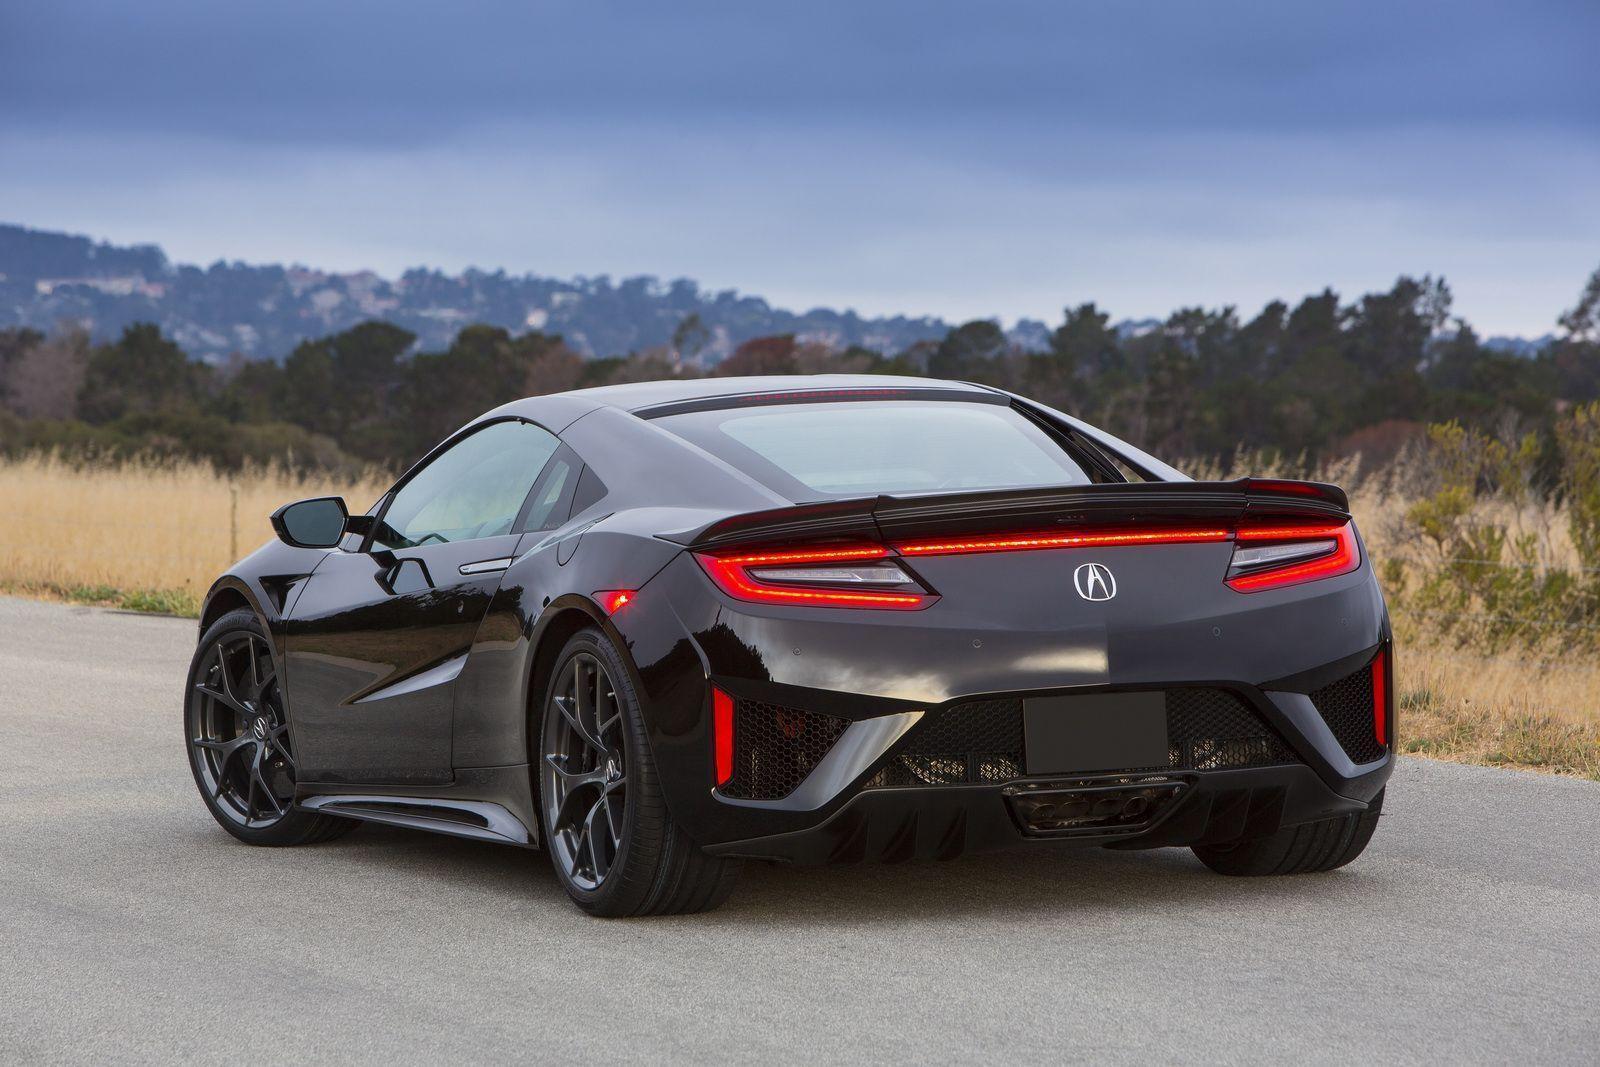 best ideas about Acura Nsx Specs. Acura nsx price